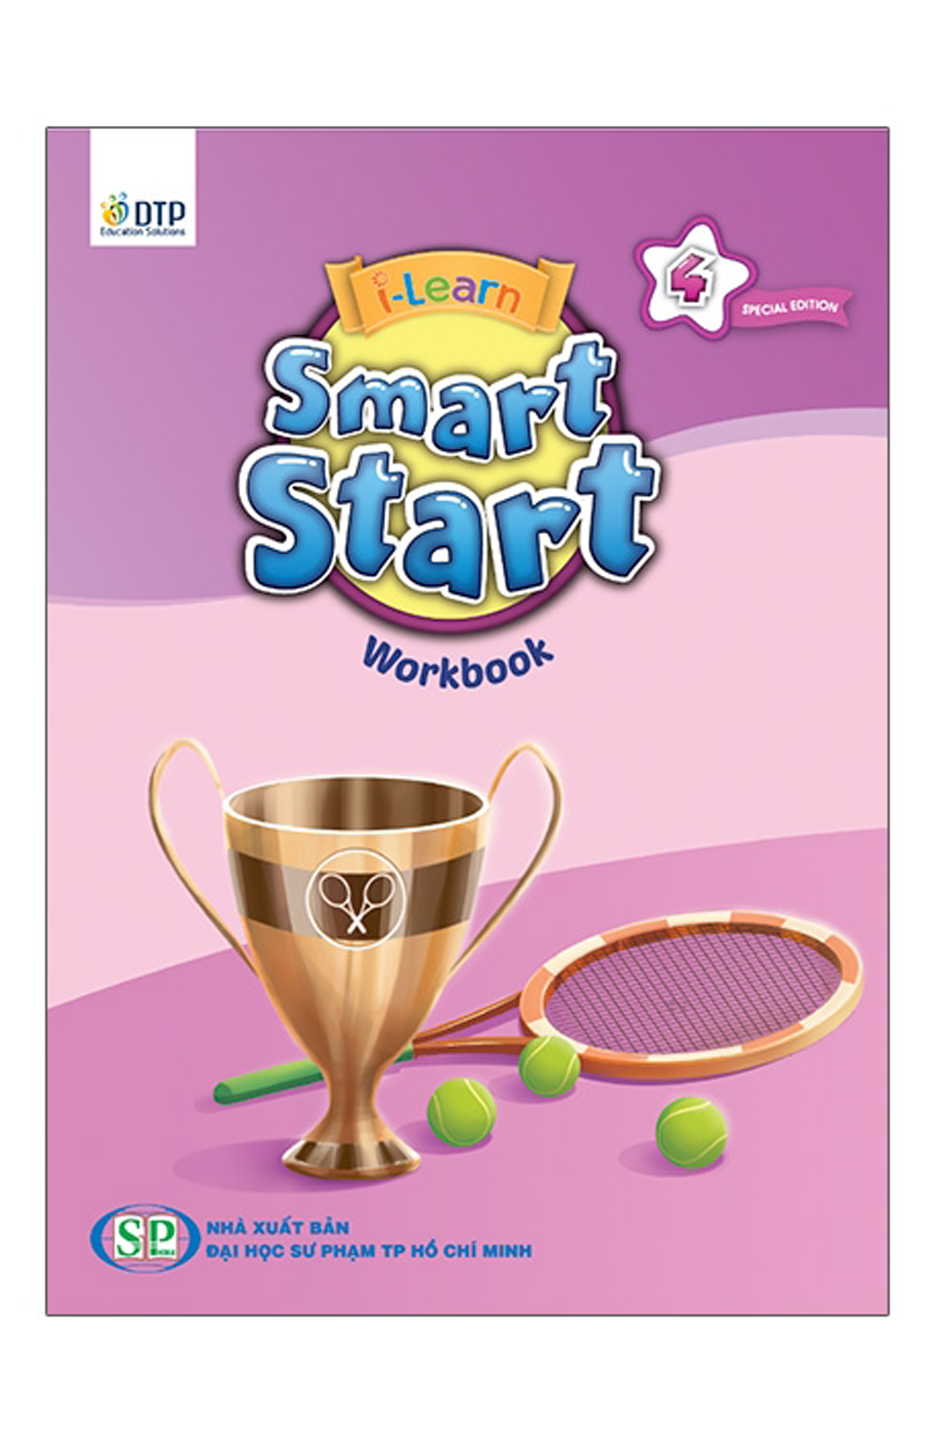 I-Learn Smart Start 4 -  Workbook Special Edition.